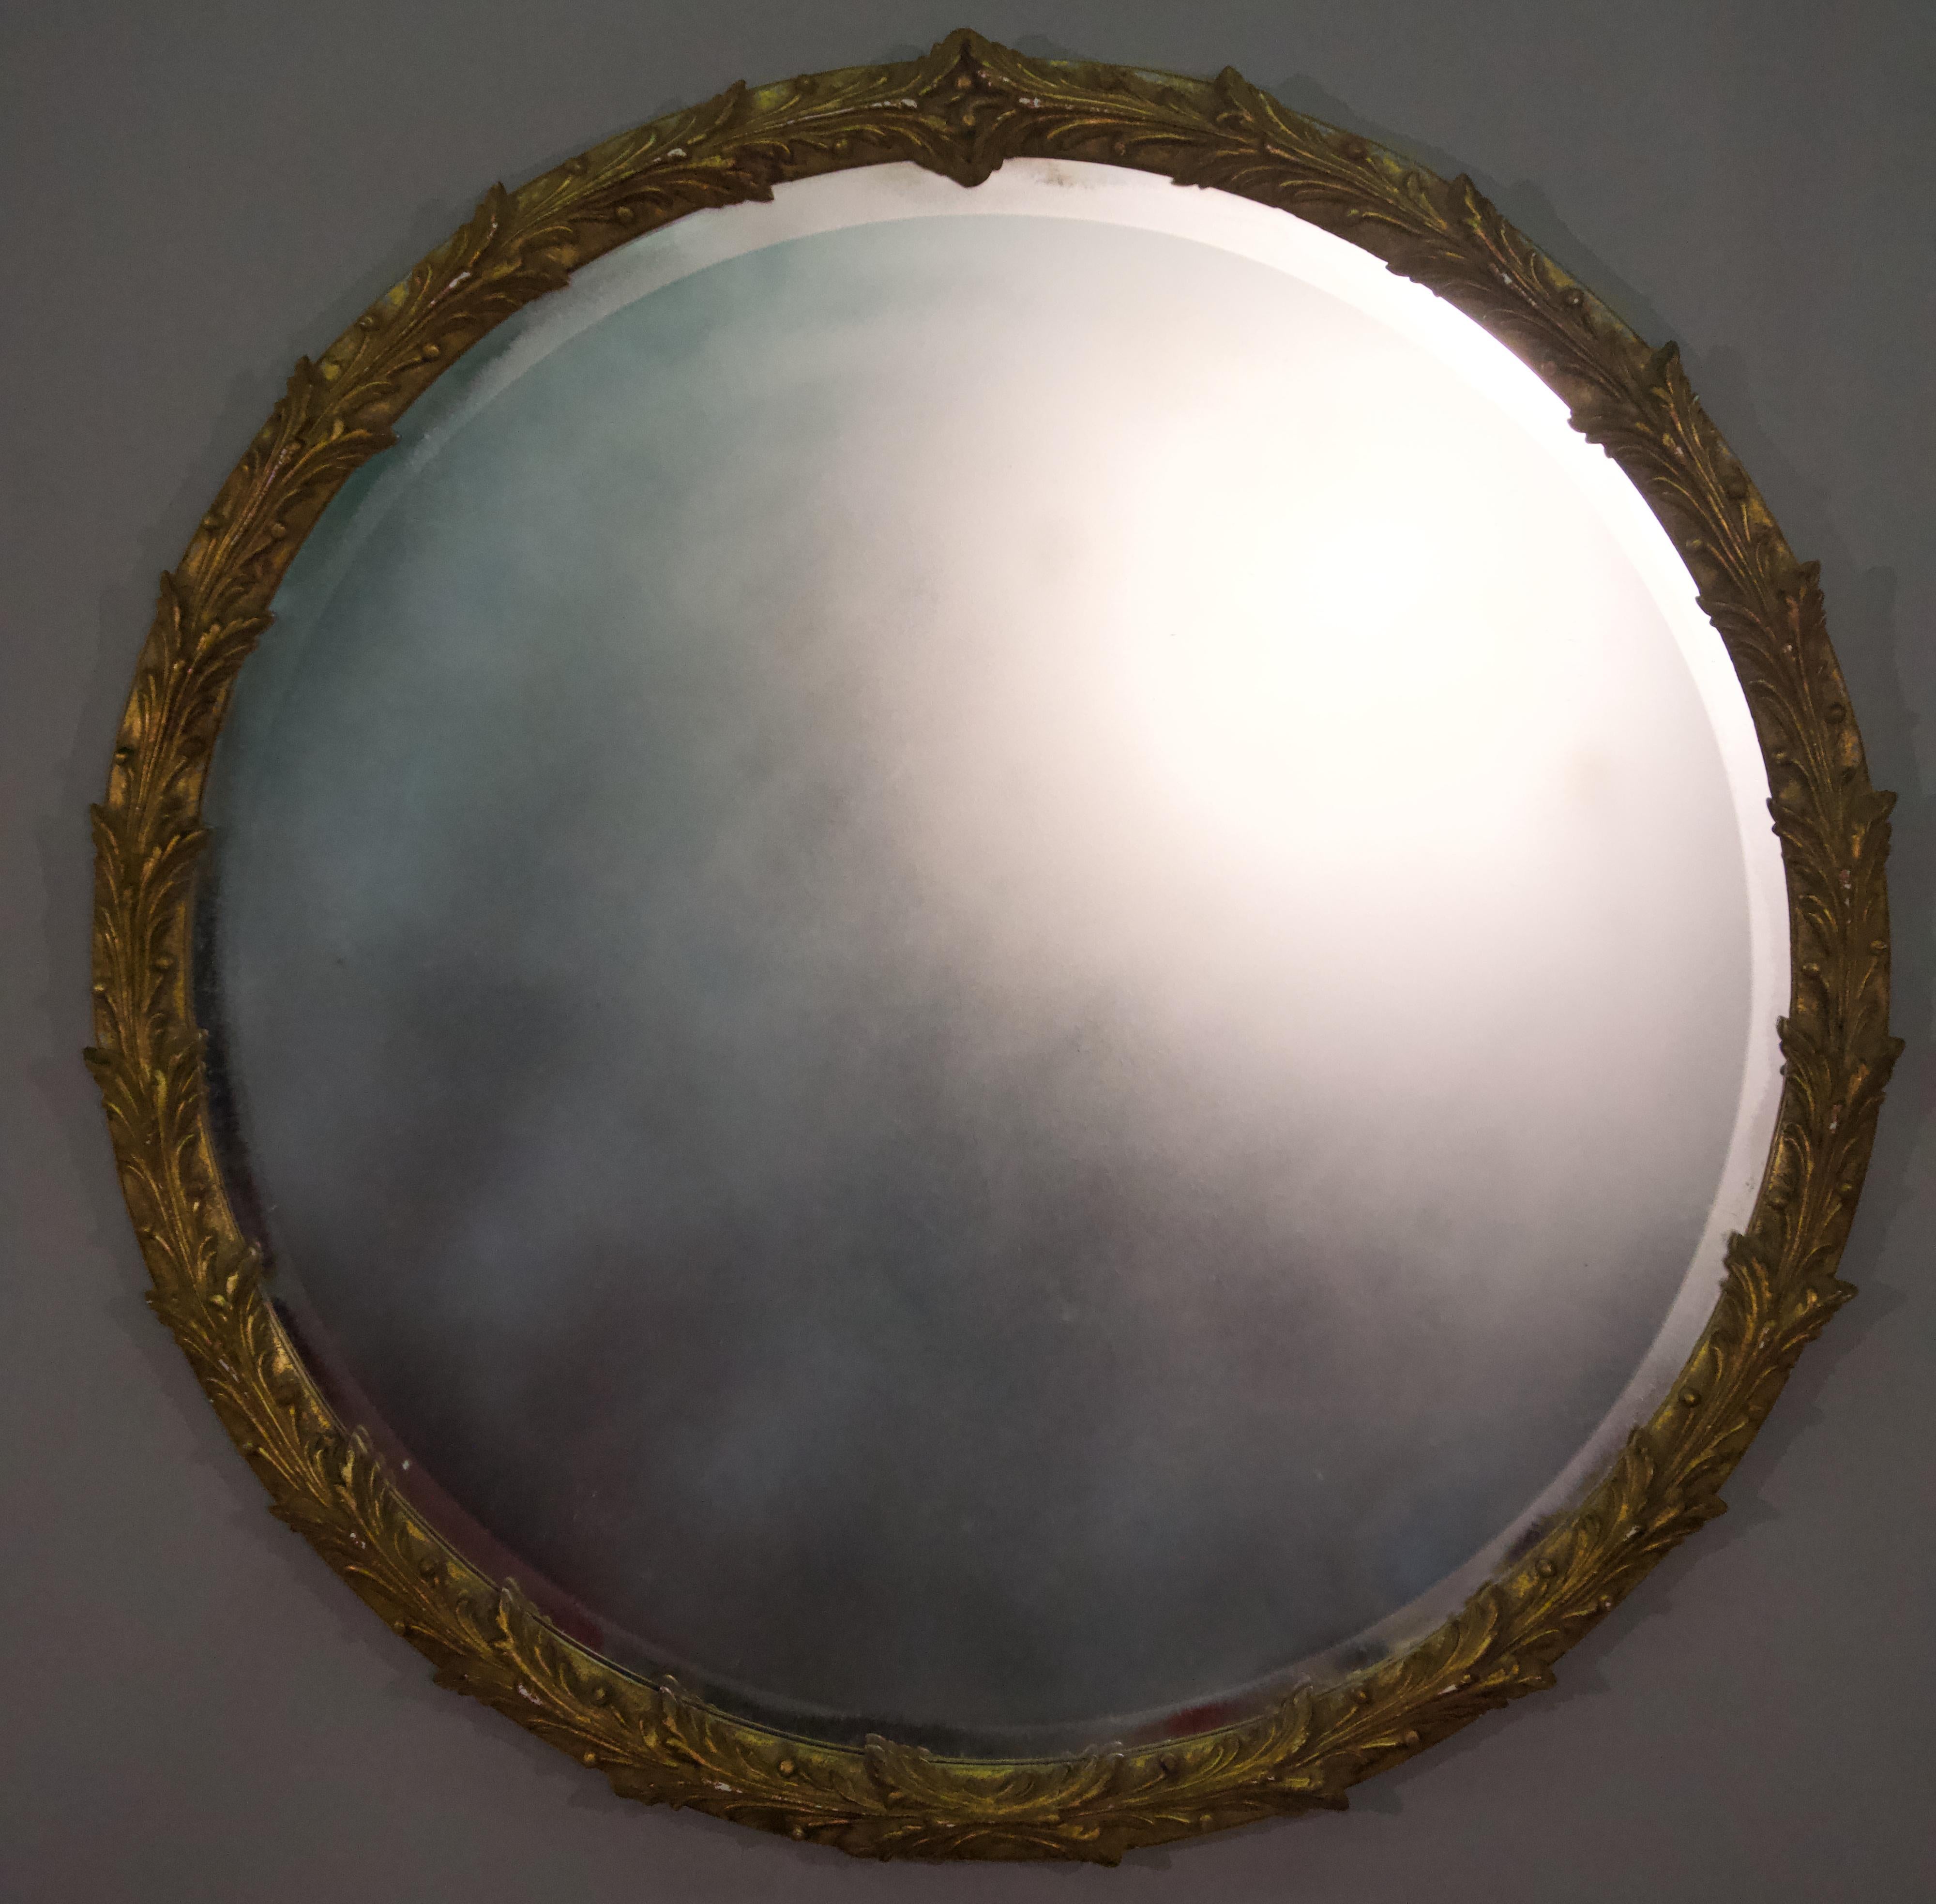 Modern giltwood beveled mirror, contemporary mirror plate with spray matte finish for photo purposes only.